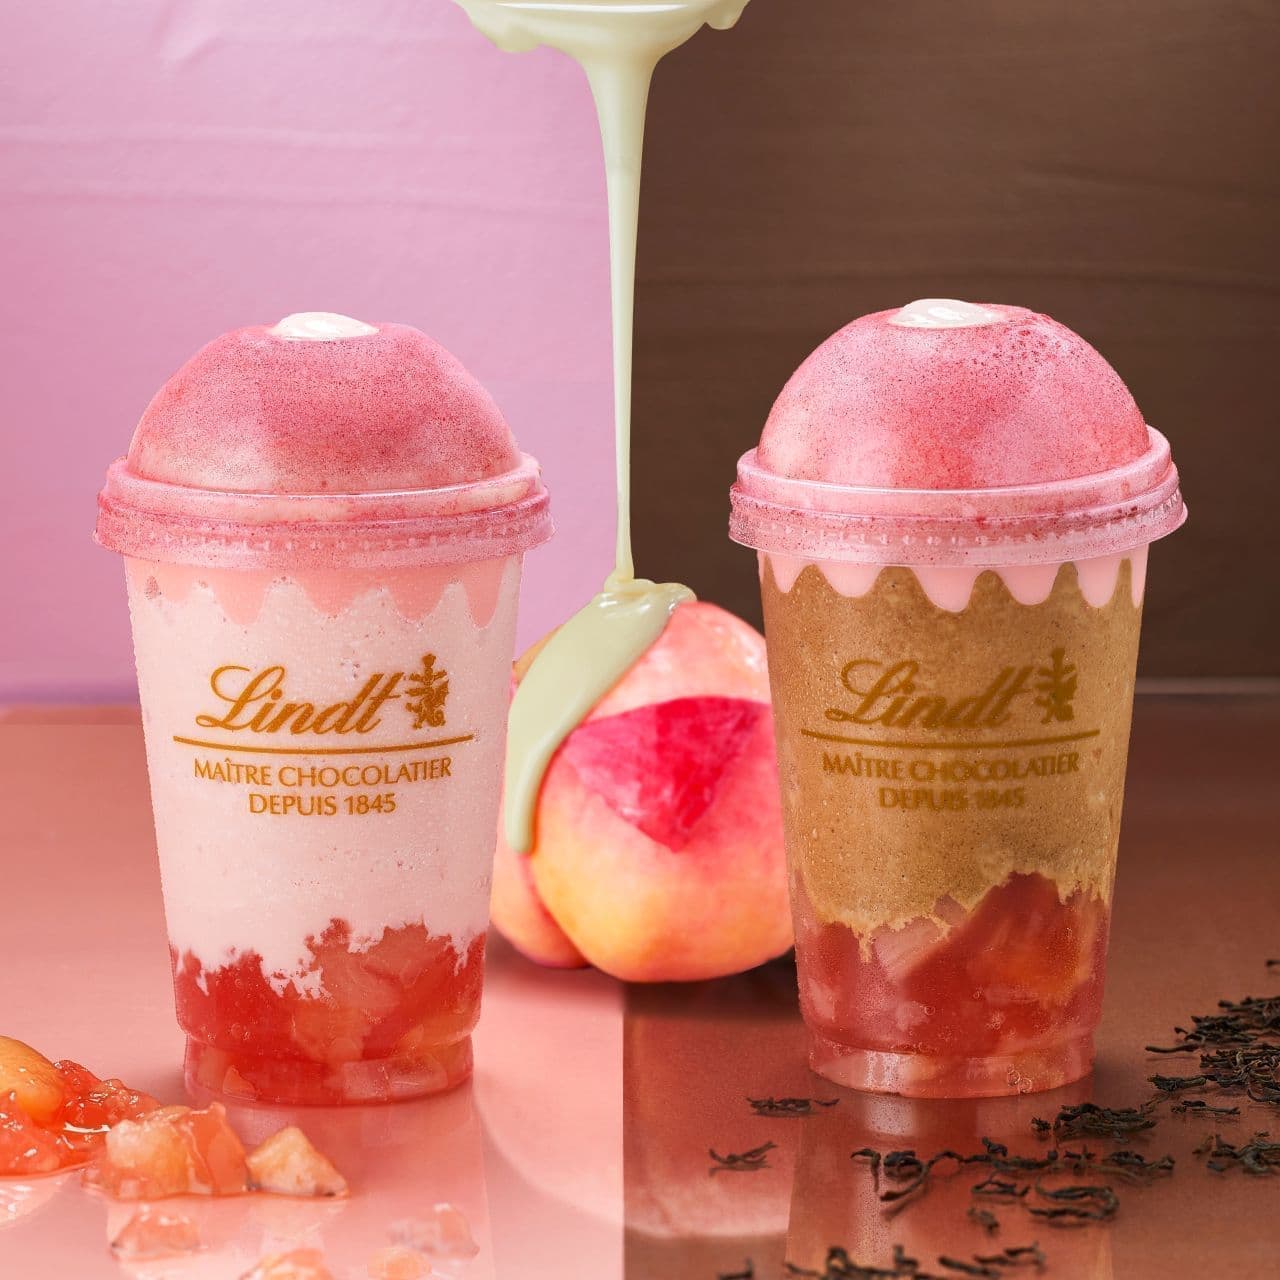 "Lindt Gorotto Peach x Peach Chocolat Drink" and "Lindt Fragrant Earl Gray x Peach Chocolat Drink"